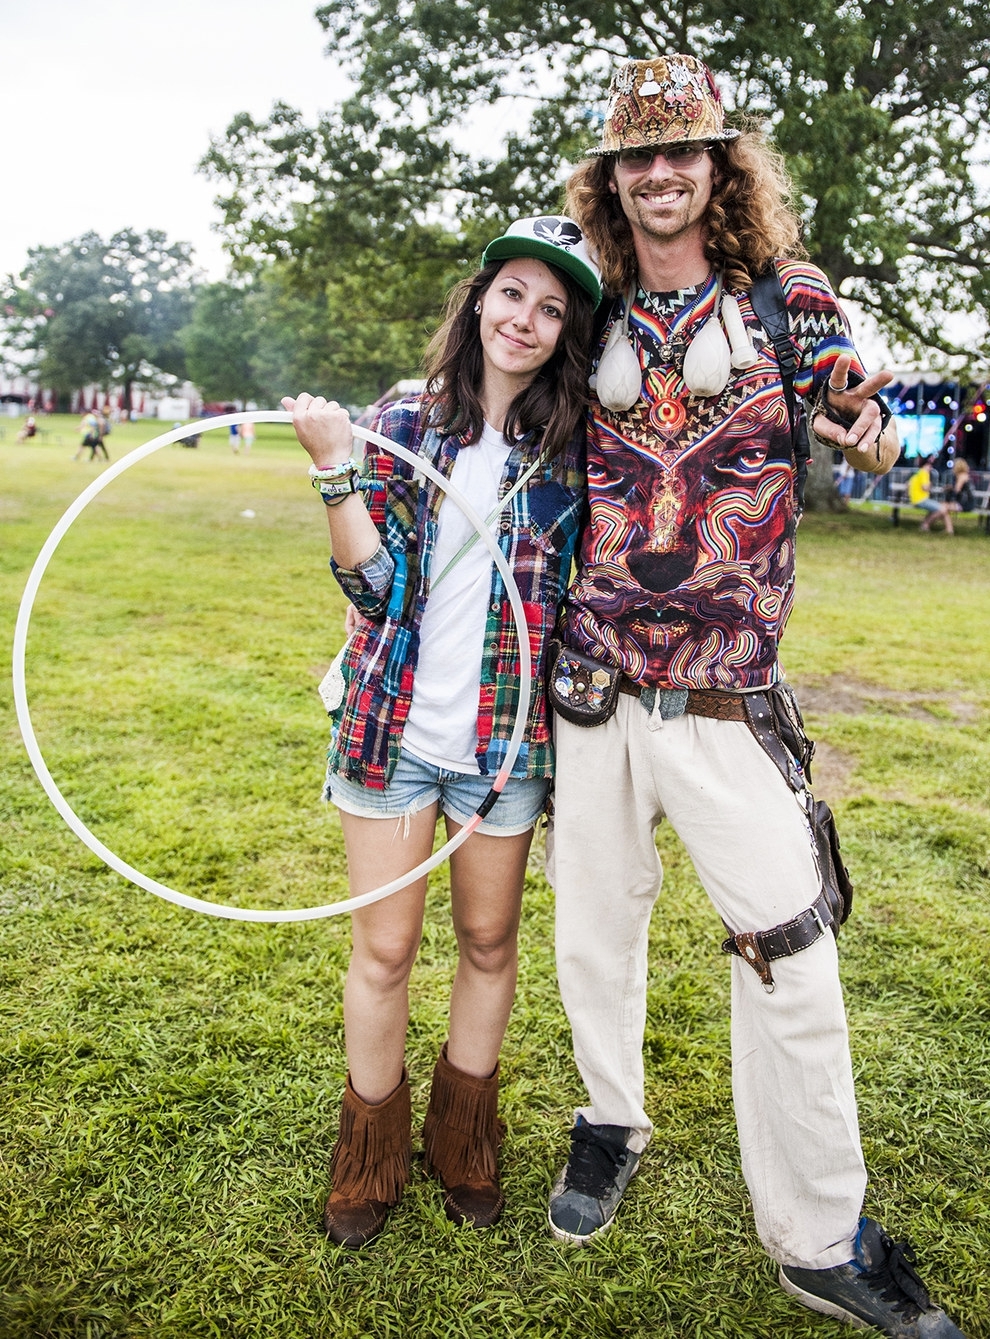 28 Photos That Perfectly Capture How Ridiculous People Are At Bonnaroo